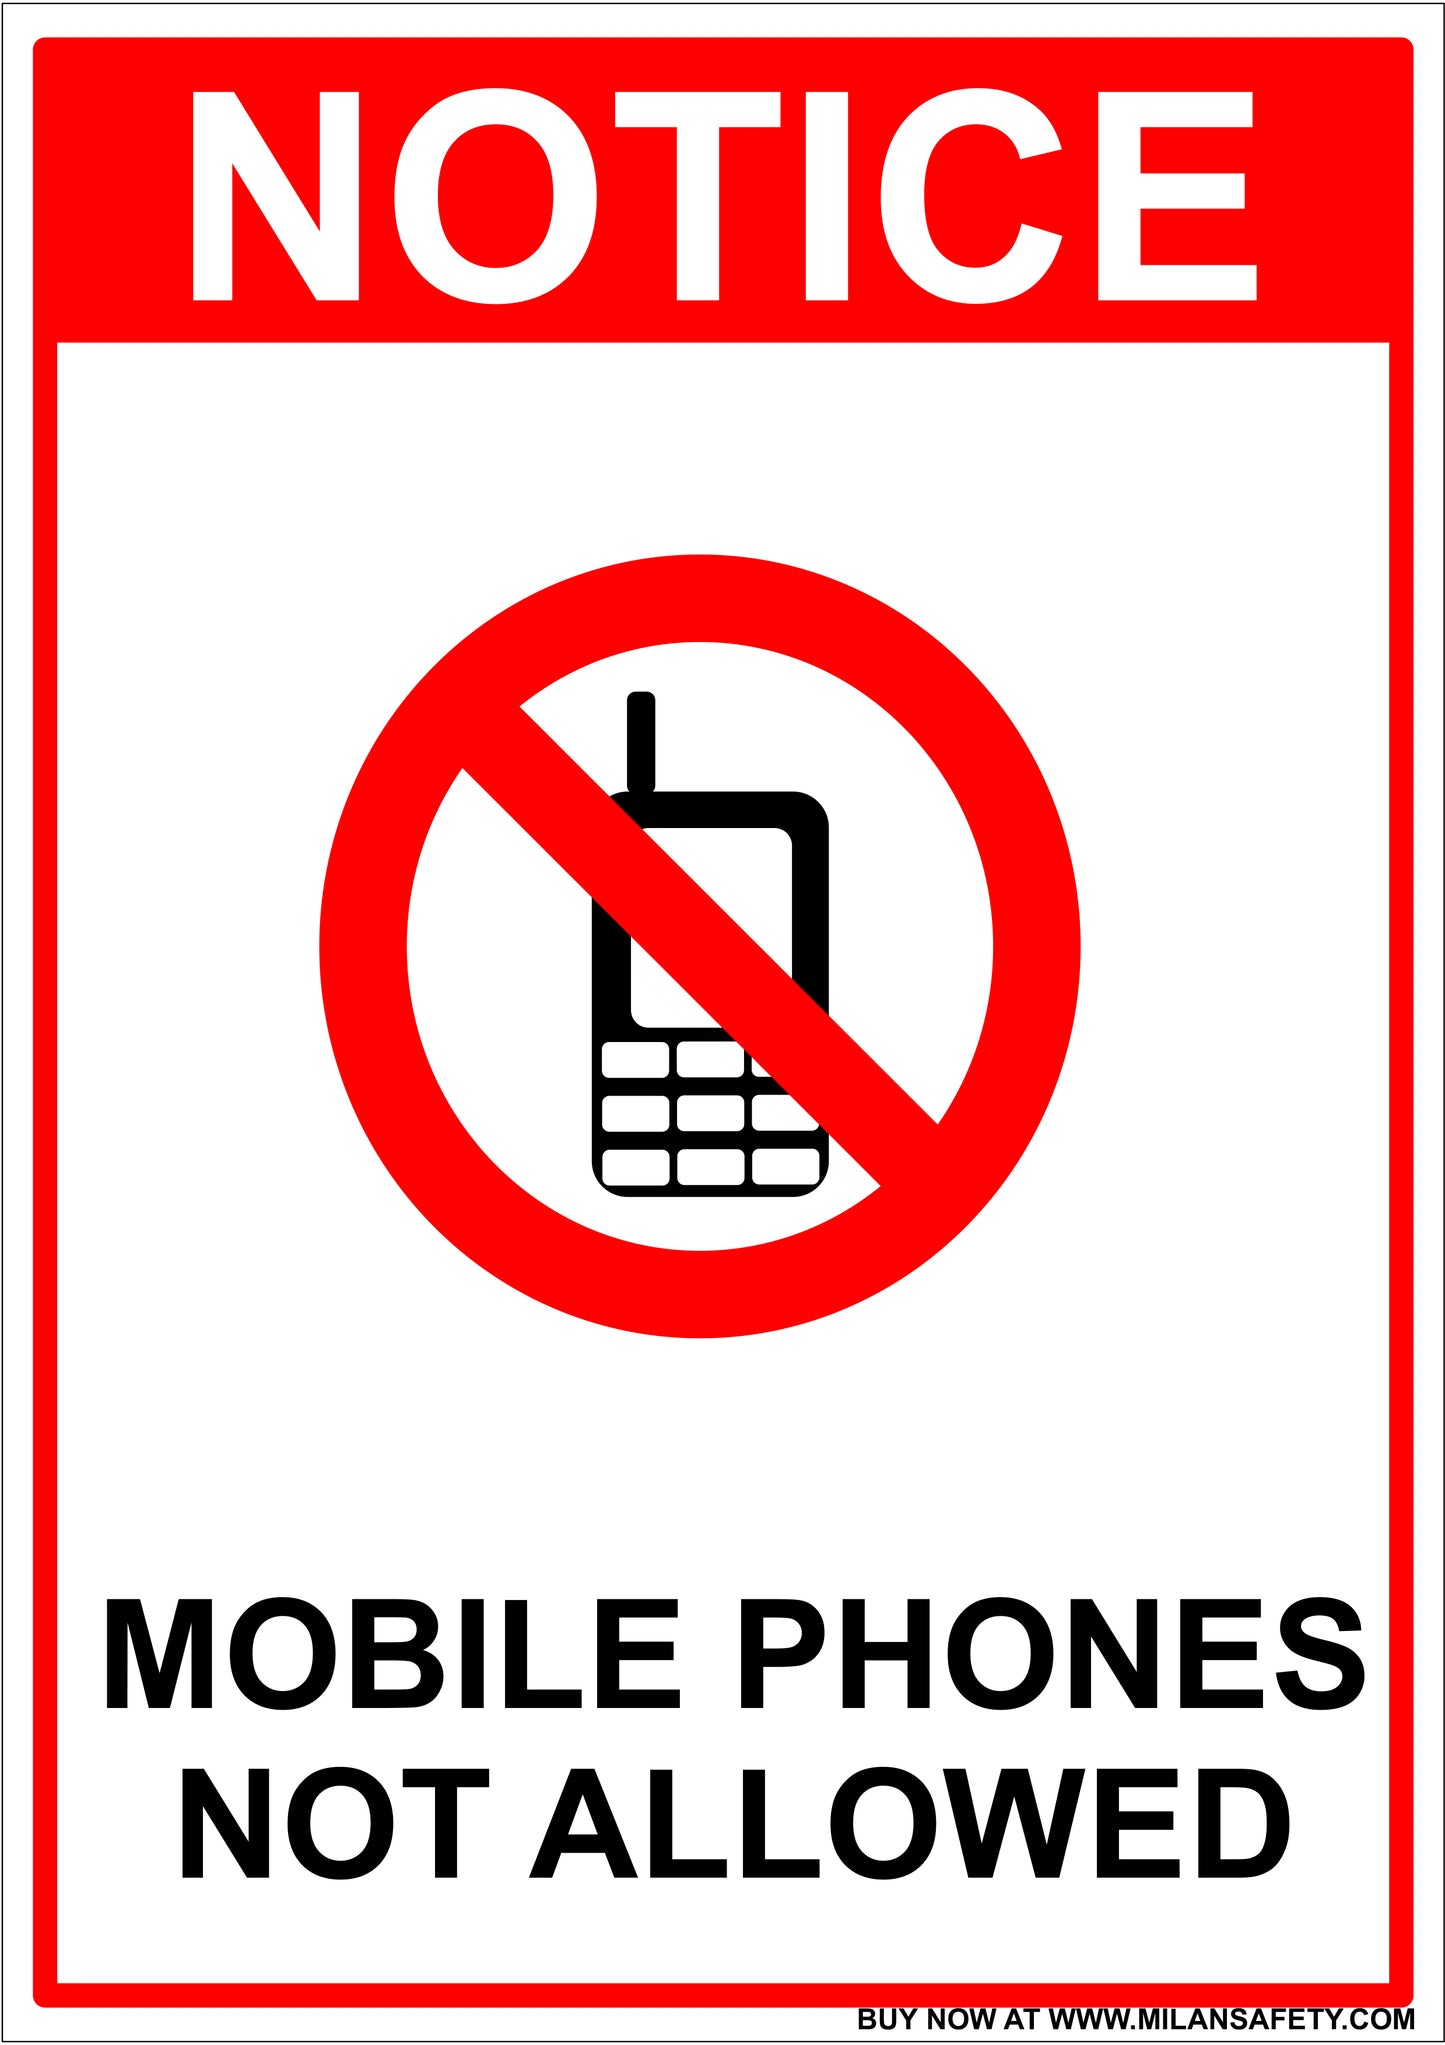 Phones not allowed signage